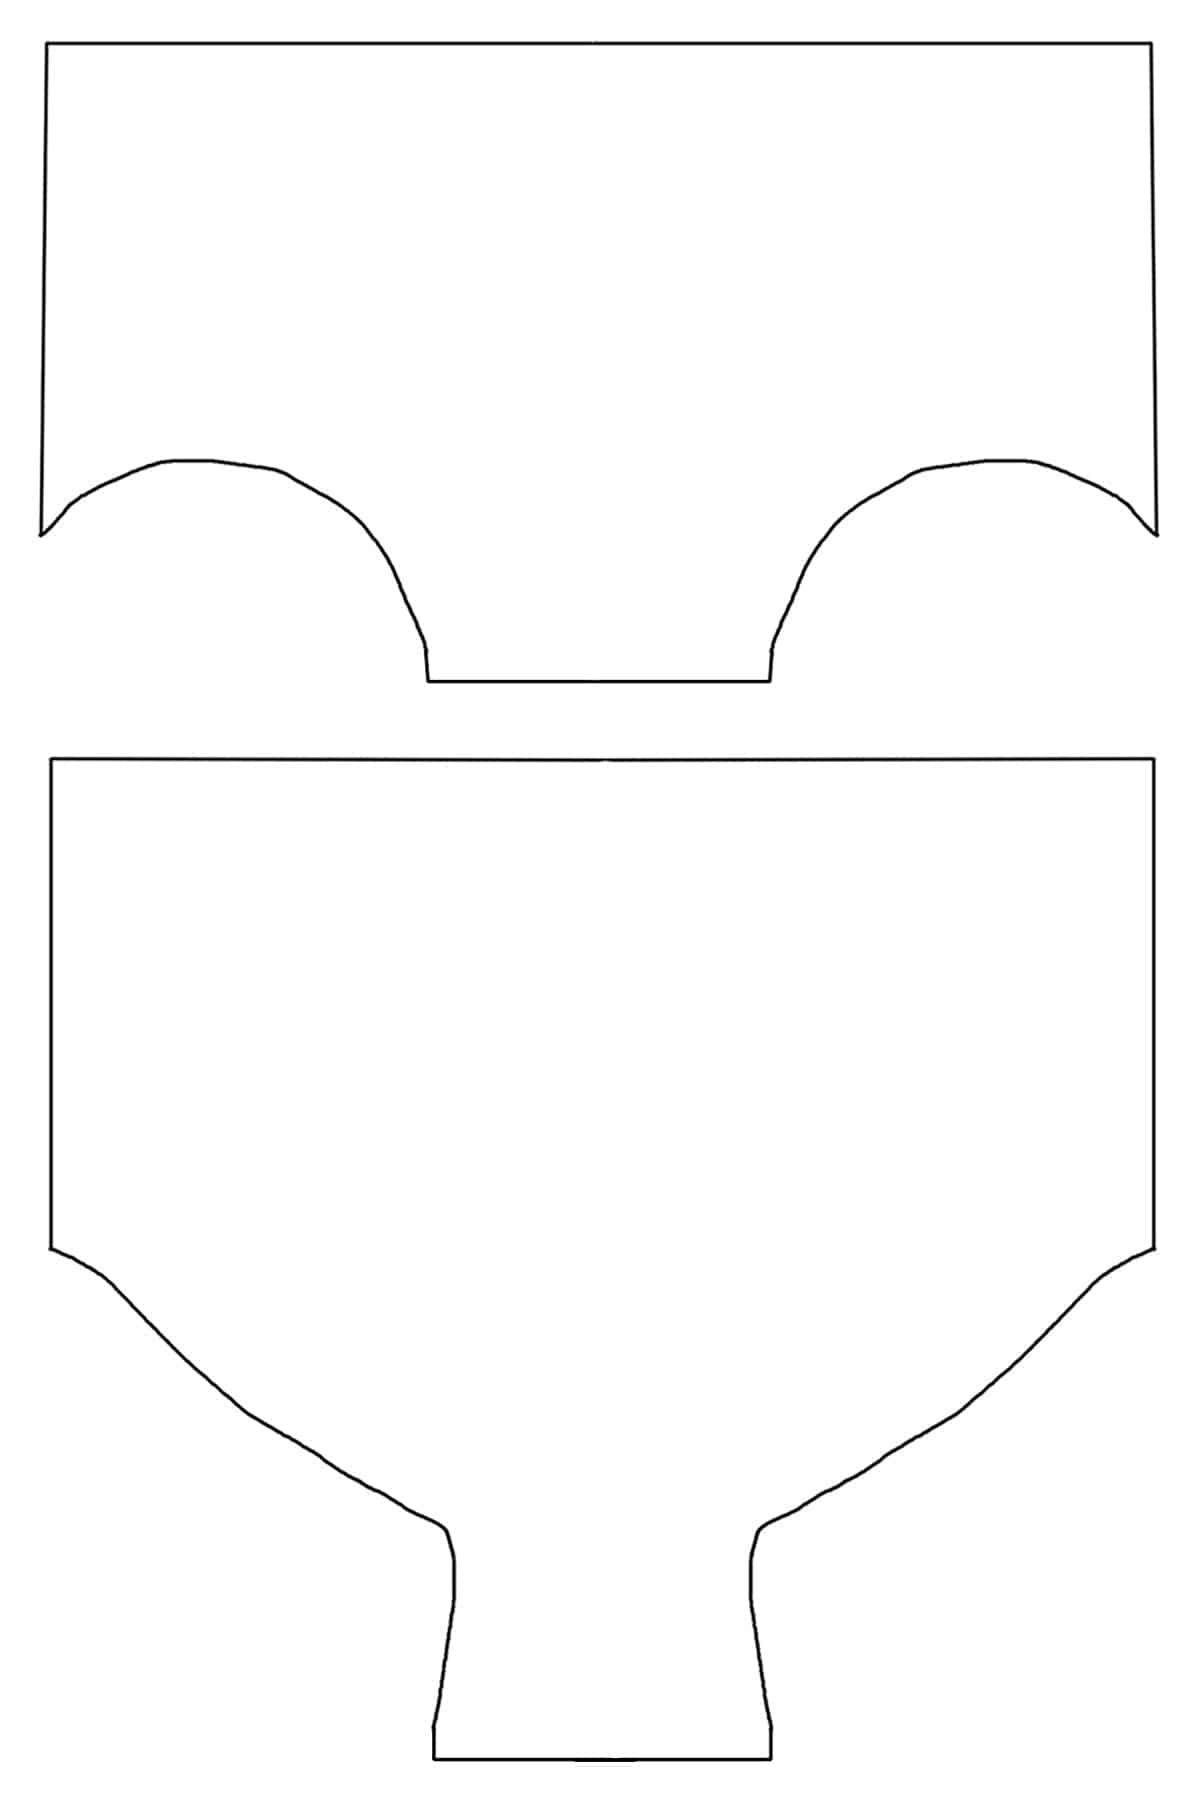 A diagram showing the new front and back pattern pieces for the brief.